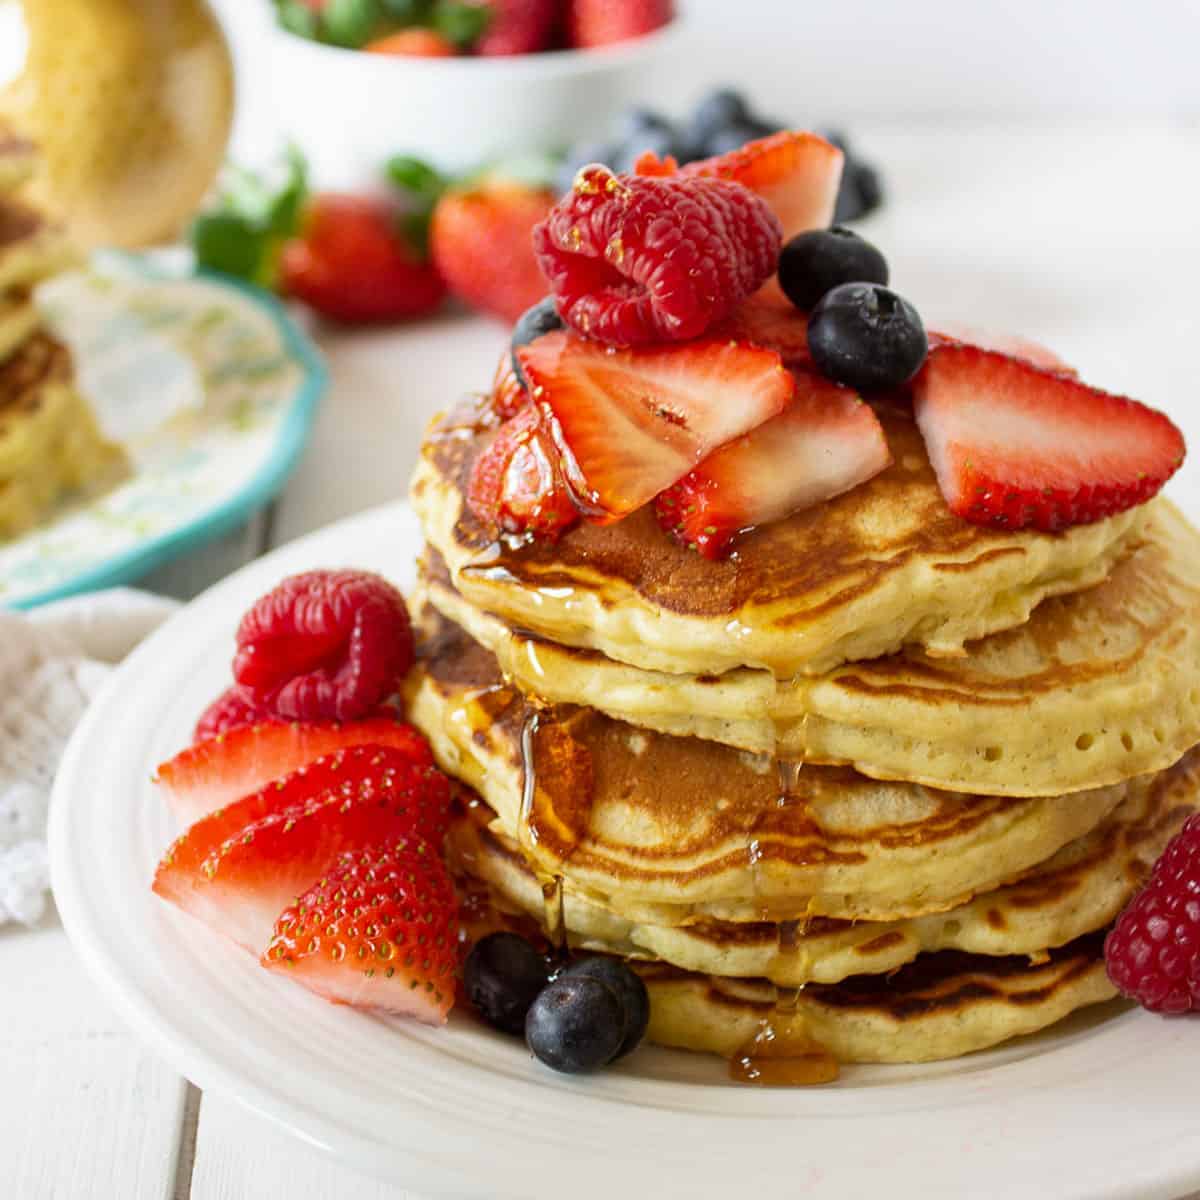 A stack of pancakes topped with fresh fruit and syrup.